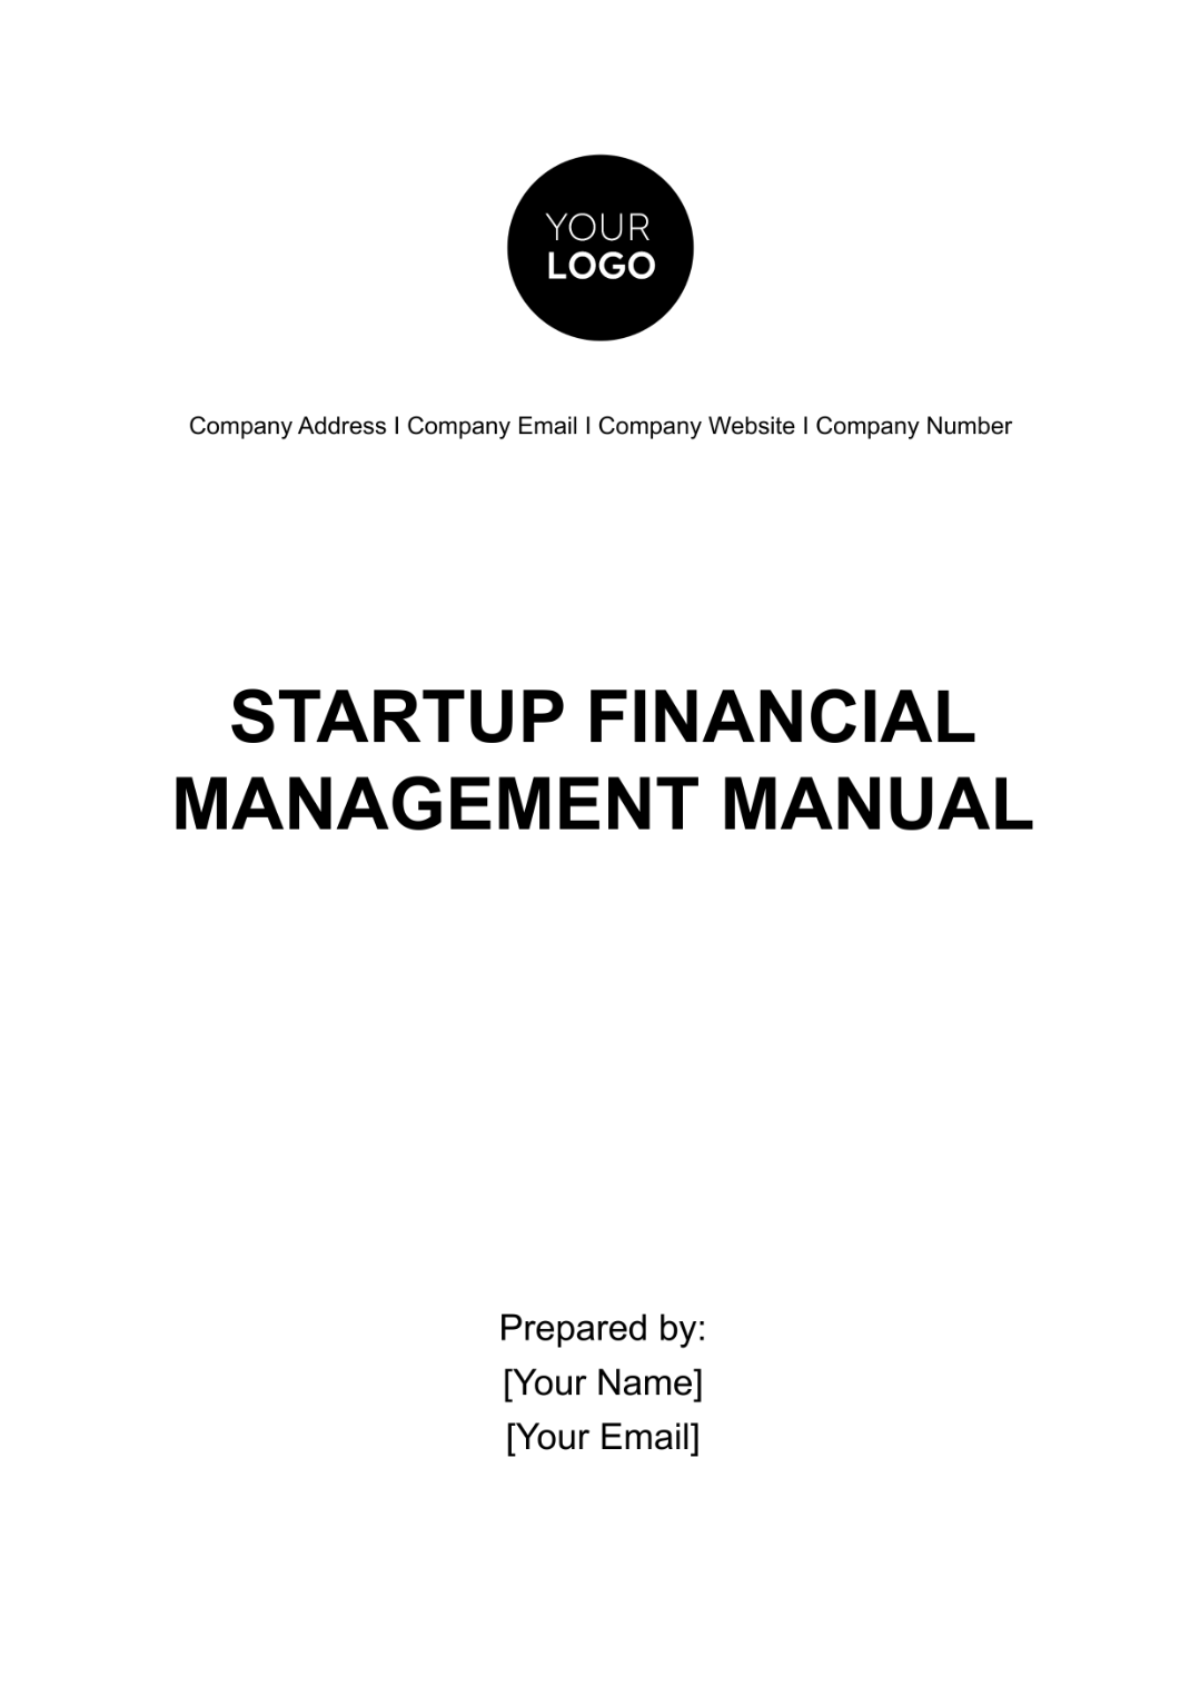 Startup Financial Management Manual Template